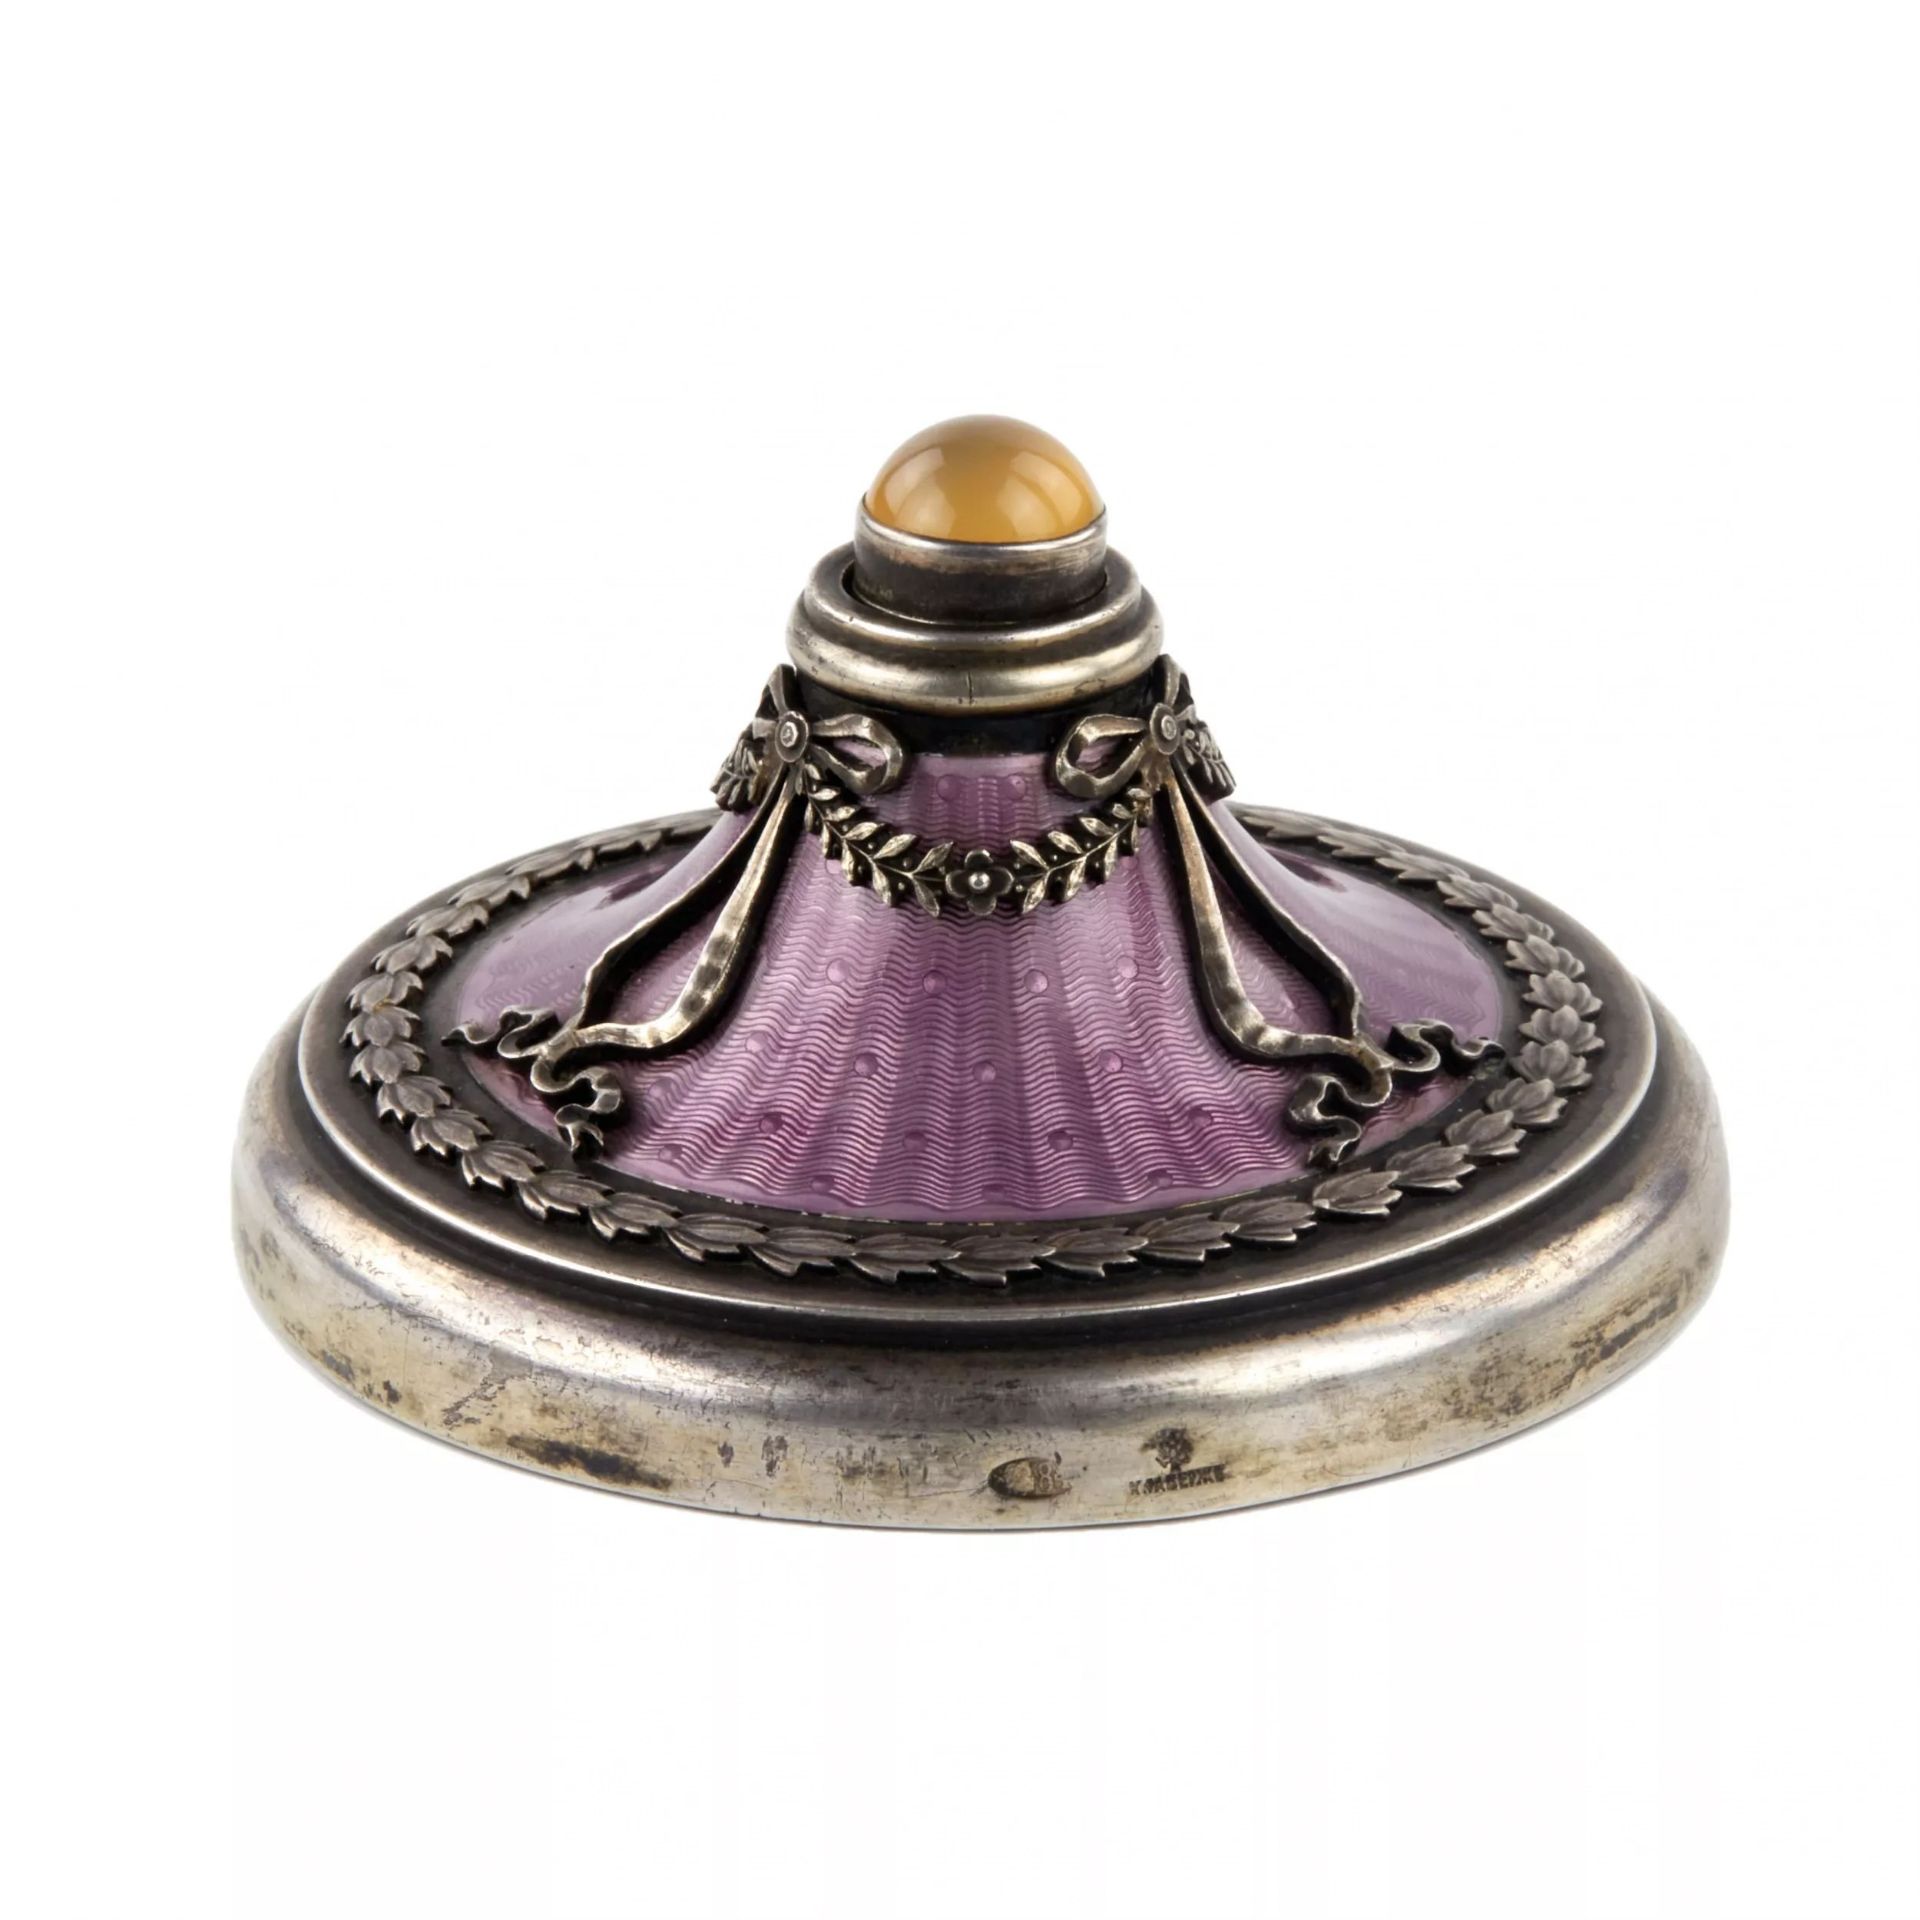 C. Faberge. Silver table bell with guilloche enamel.